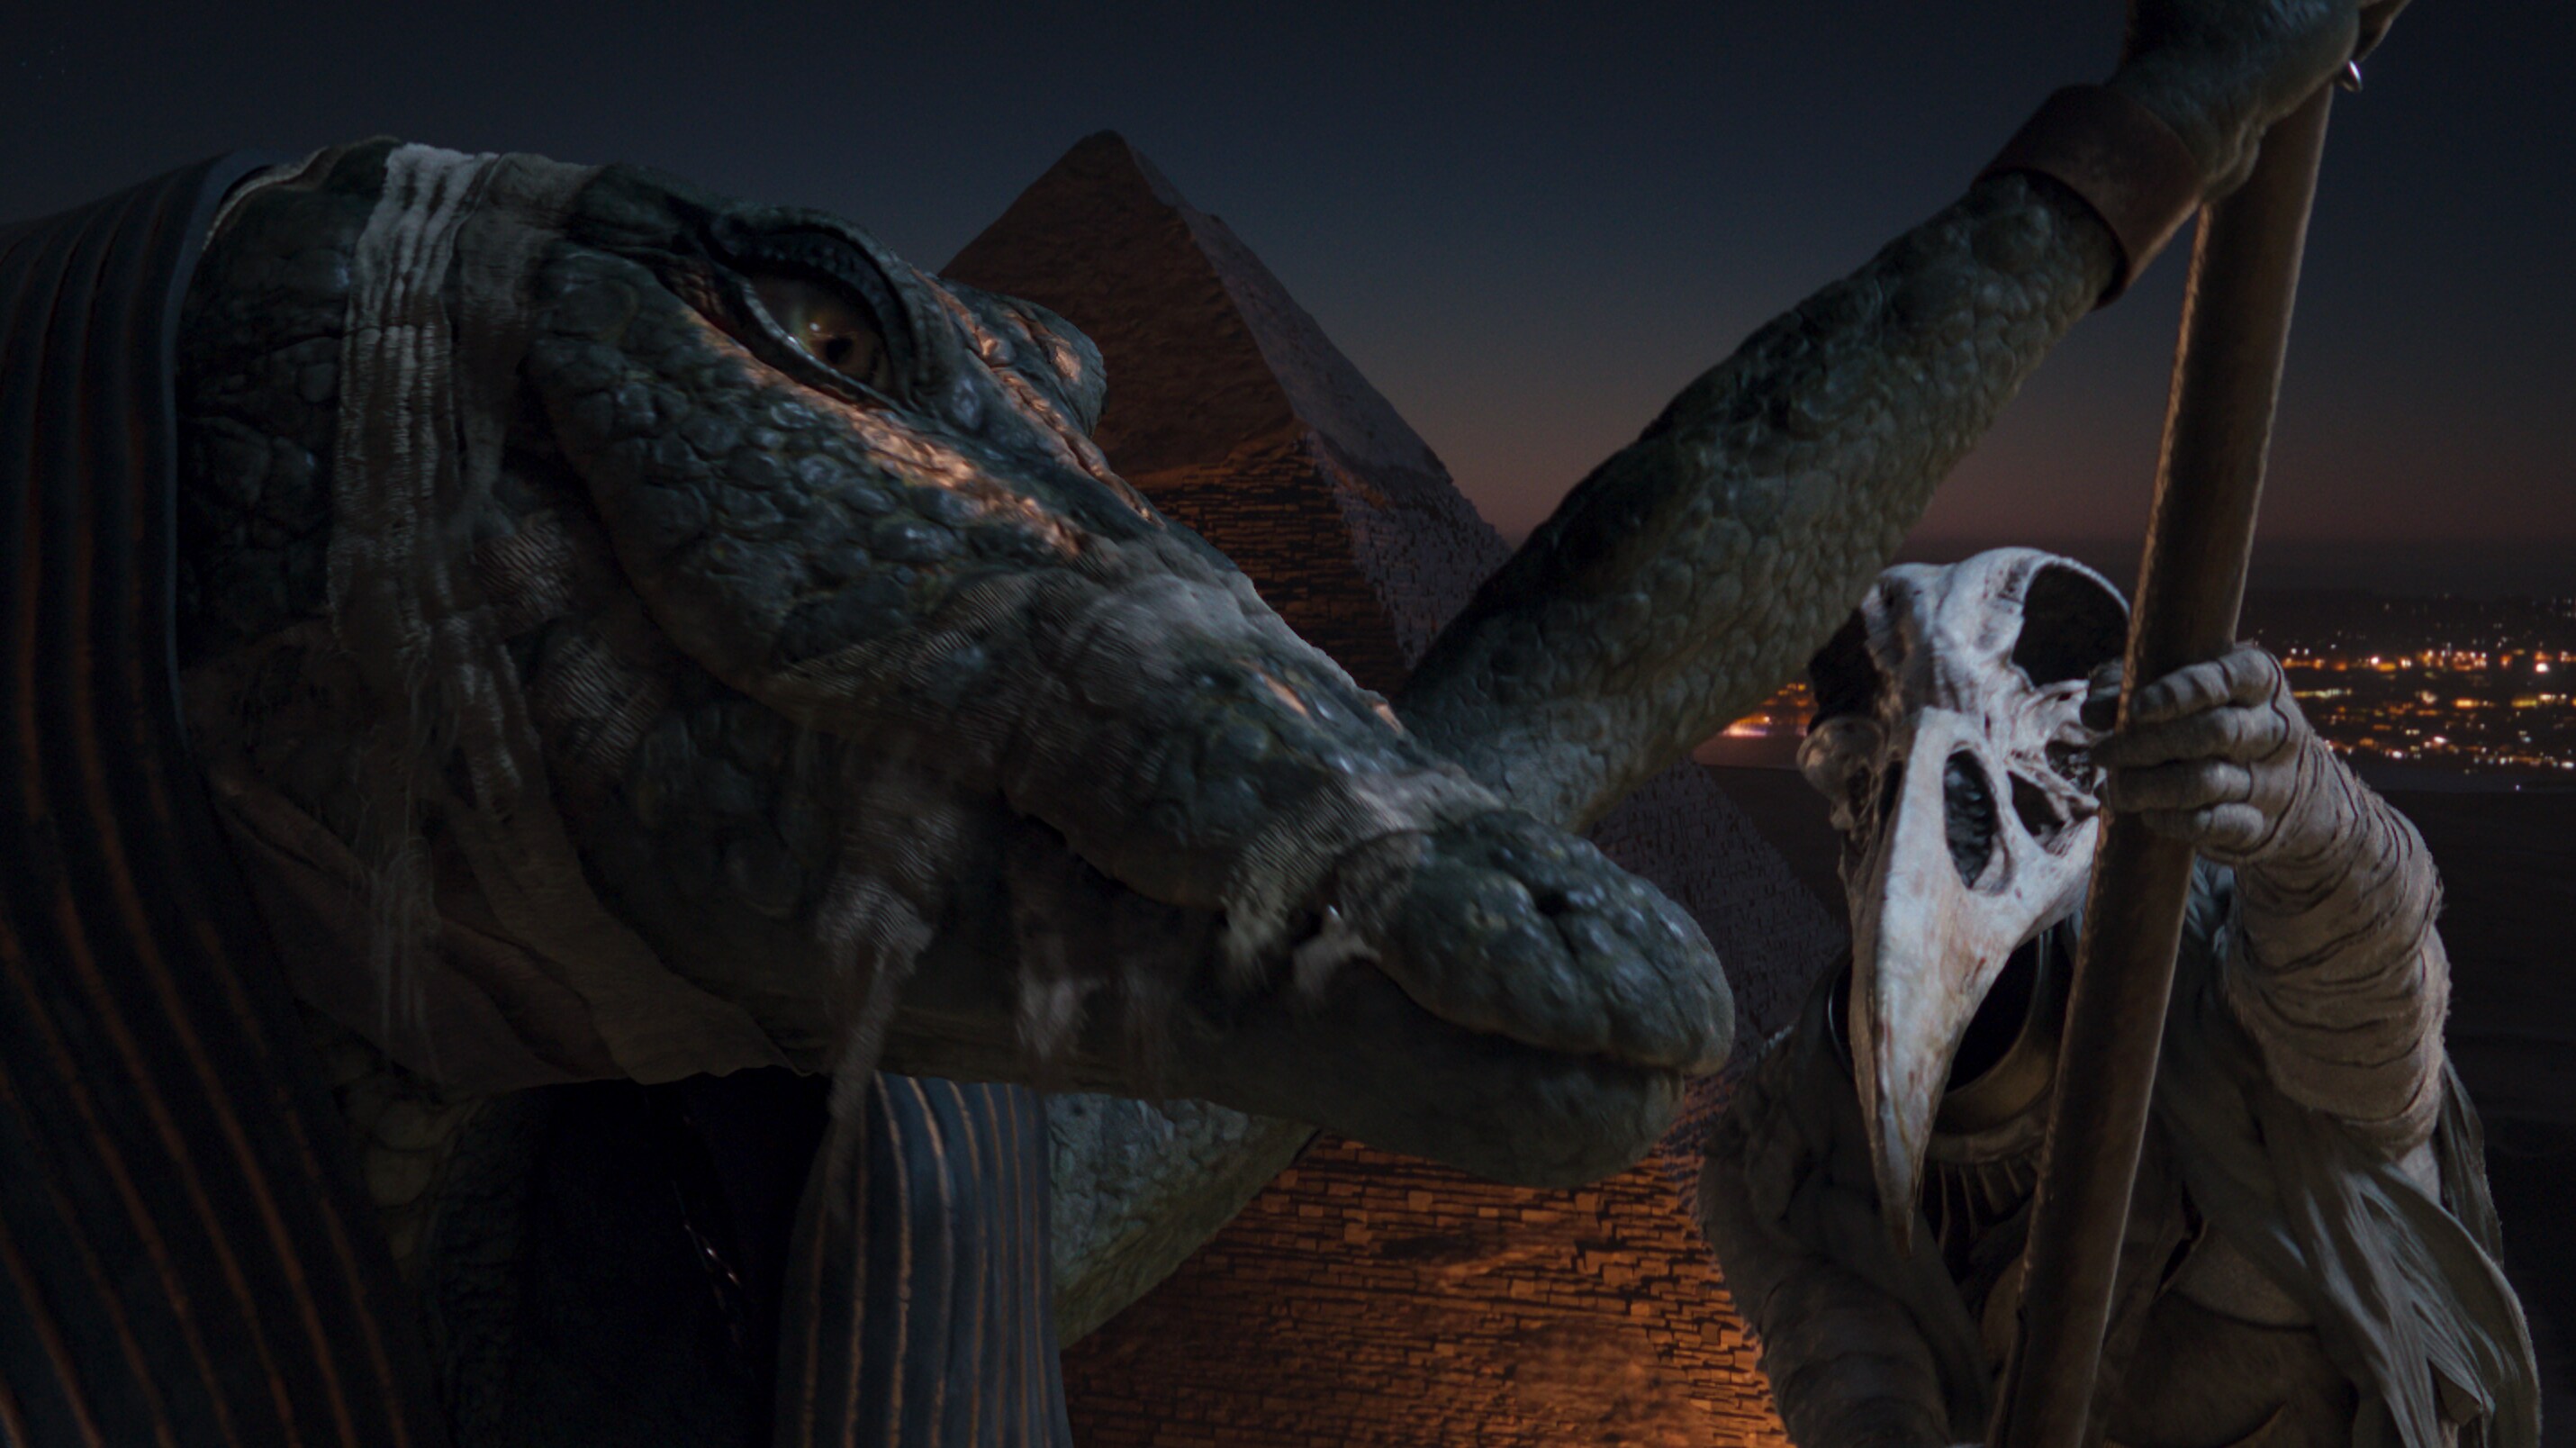 (L-R): Ammit (voiced by Saba Mubarak) and Khonshu (voiced by F. Murray Abraham) in Marvel Studios' MOON KNIGHT., exclusively on Disney+. Photo courtesy of Marvel Studios. ©Marvel Studios 2022. All Rights Reserved.